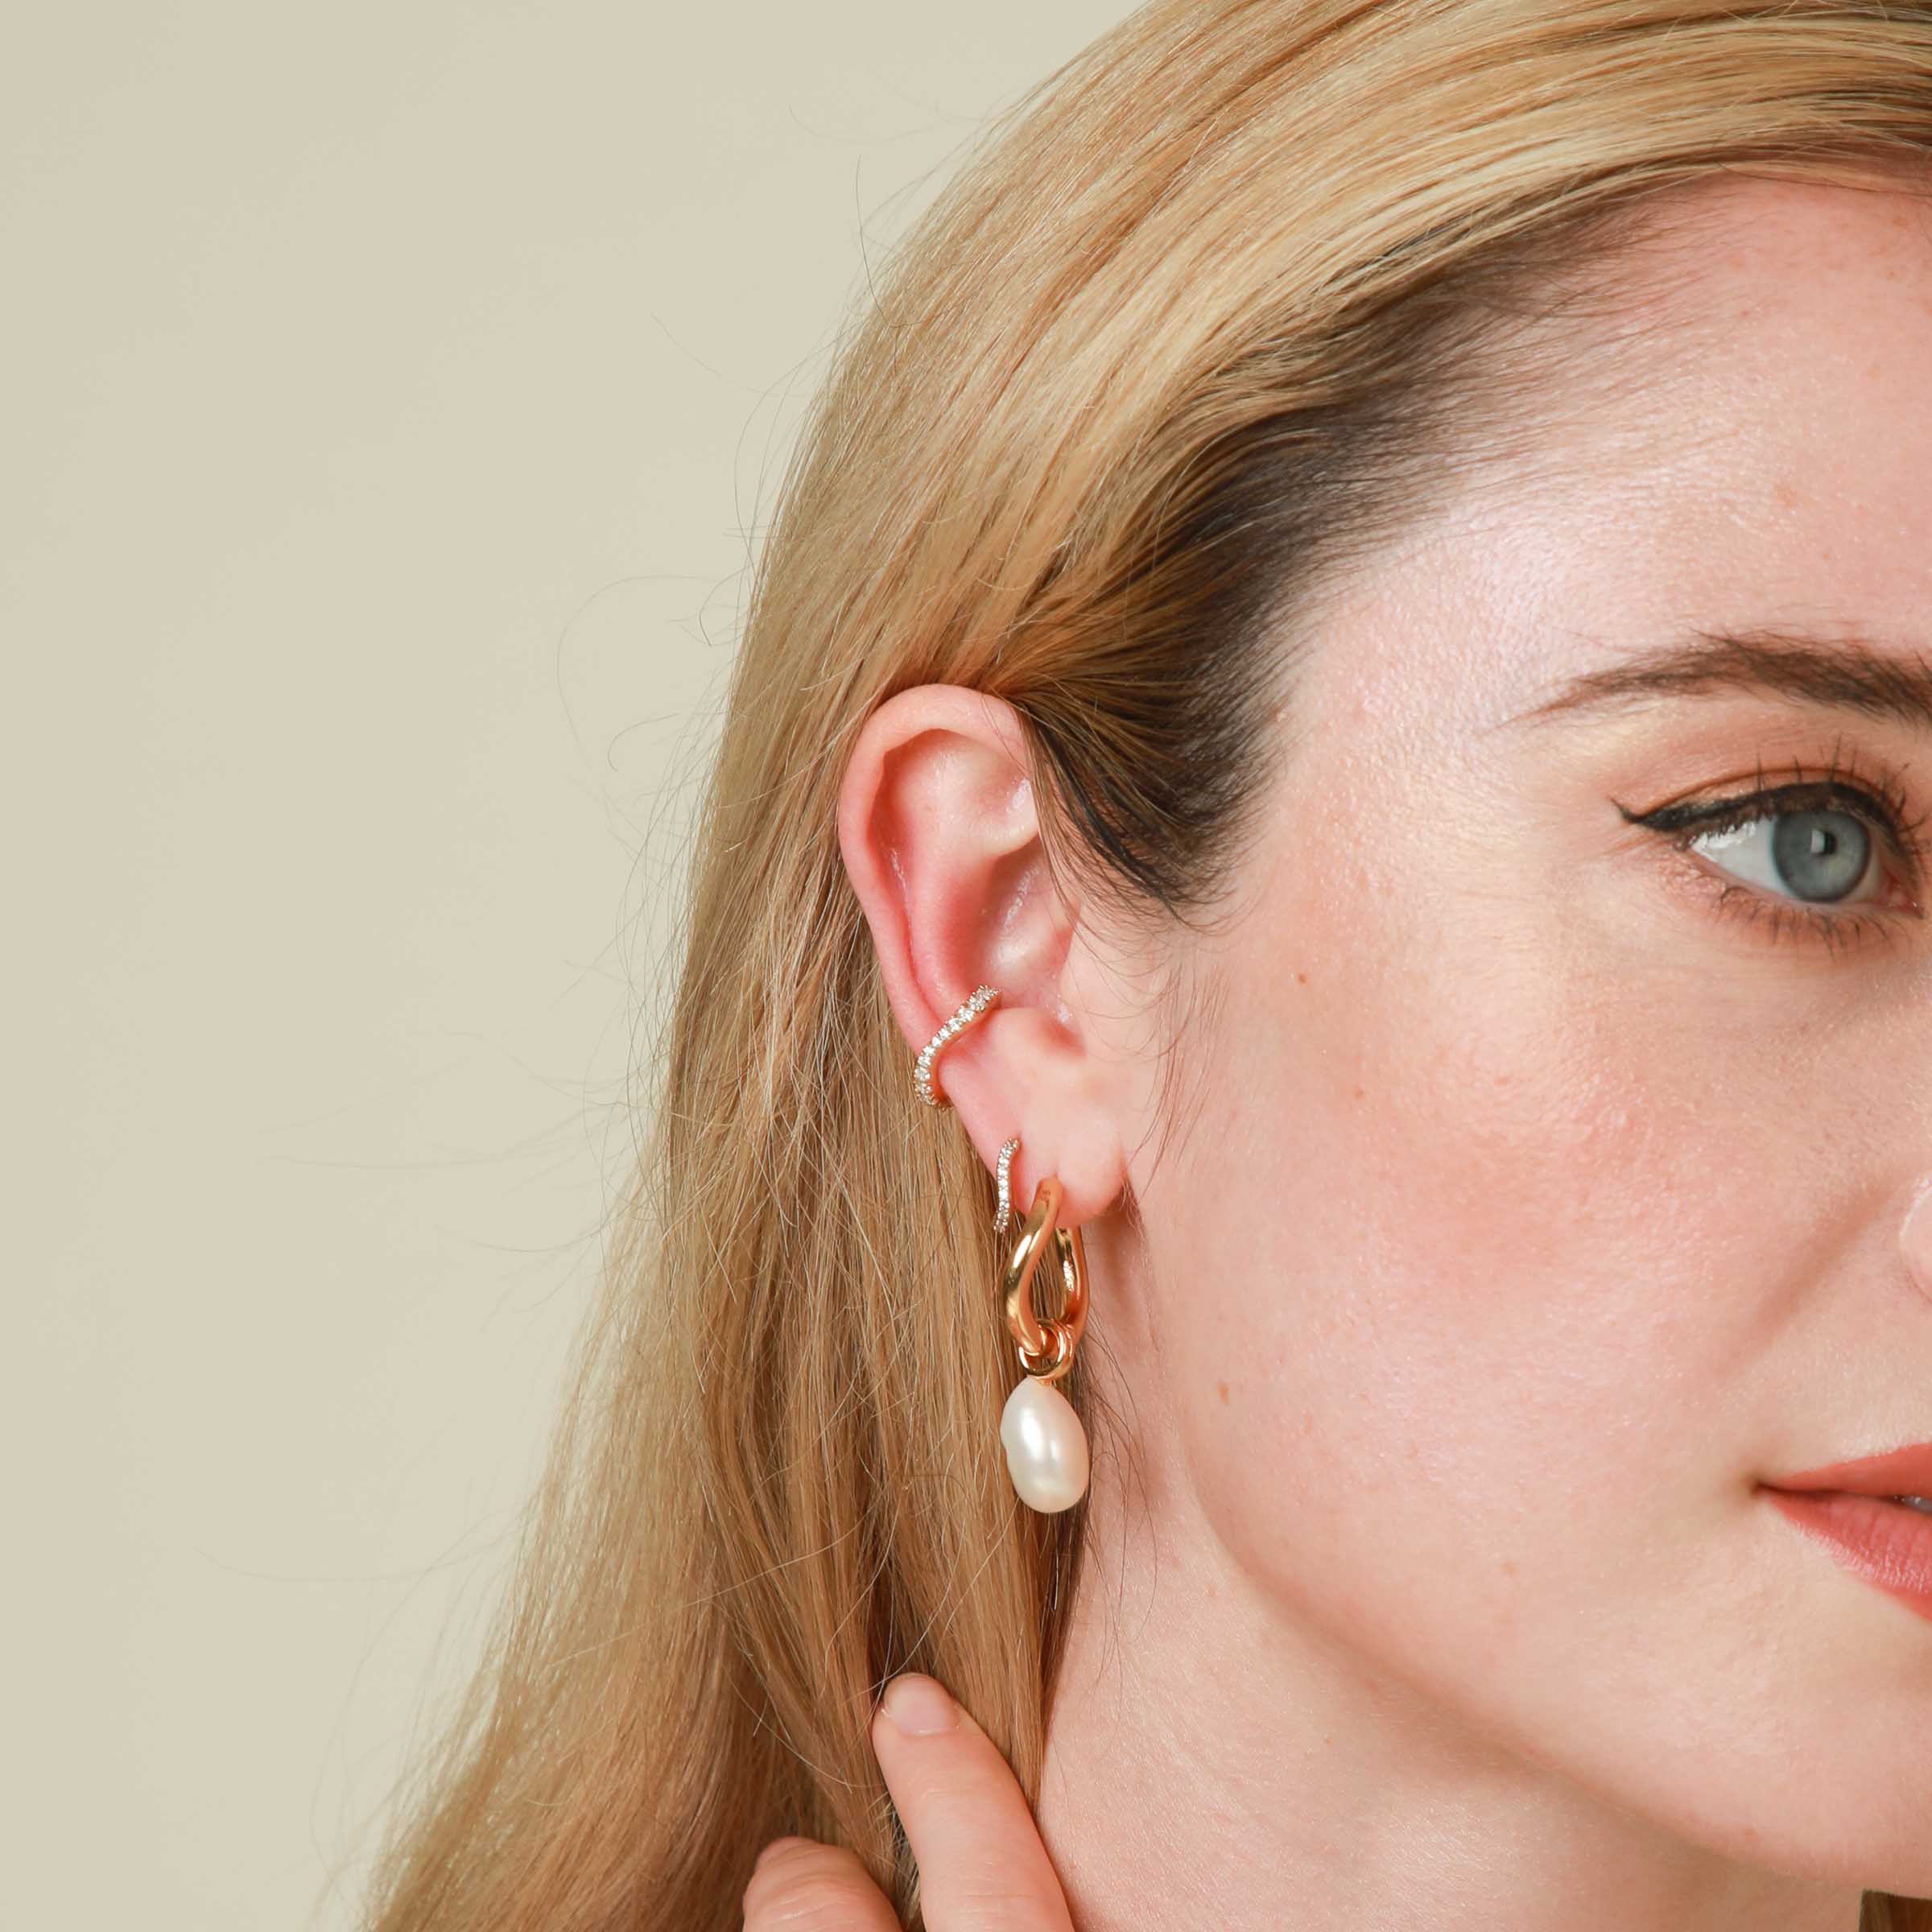 Wave Crystal Ear Cuff in Gold worn with Wave Crystal Ear Huggie and Pearl Charm Hoops